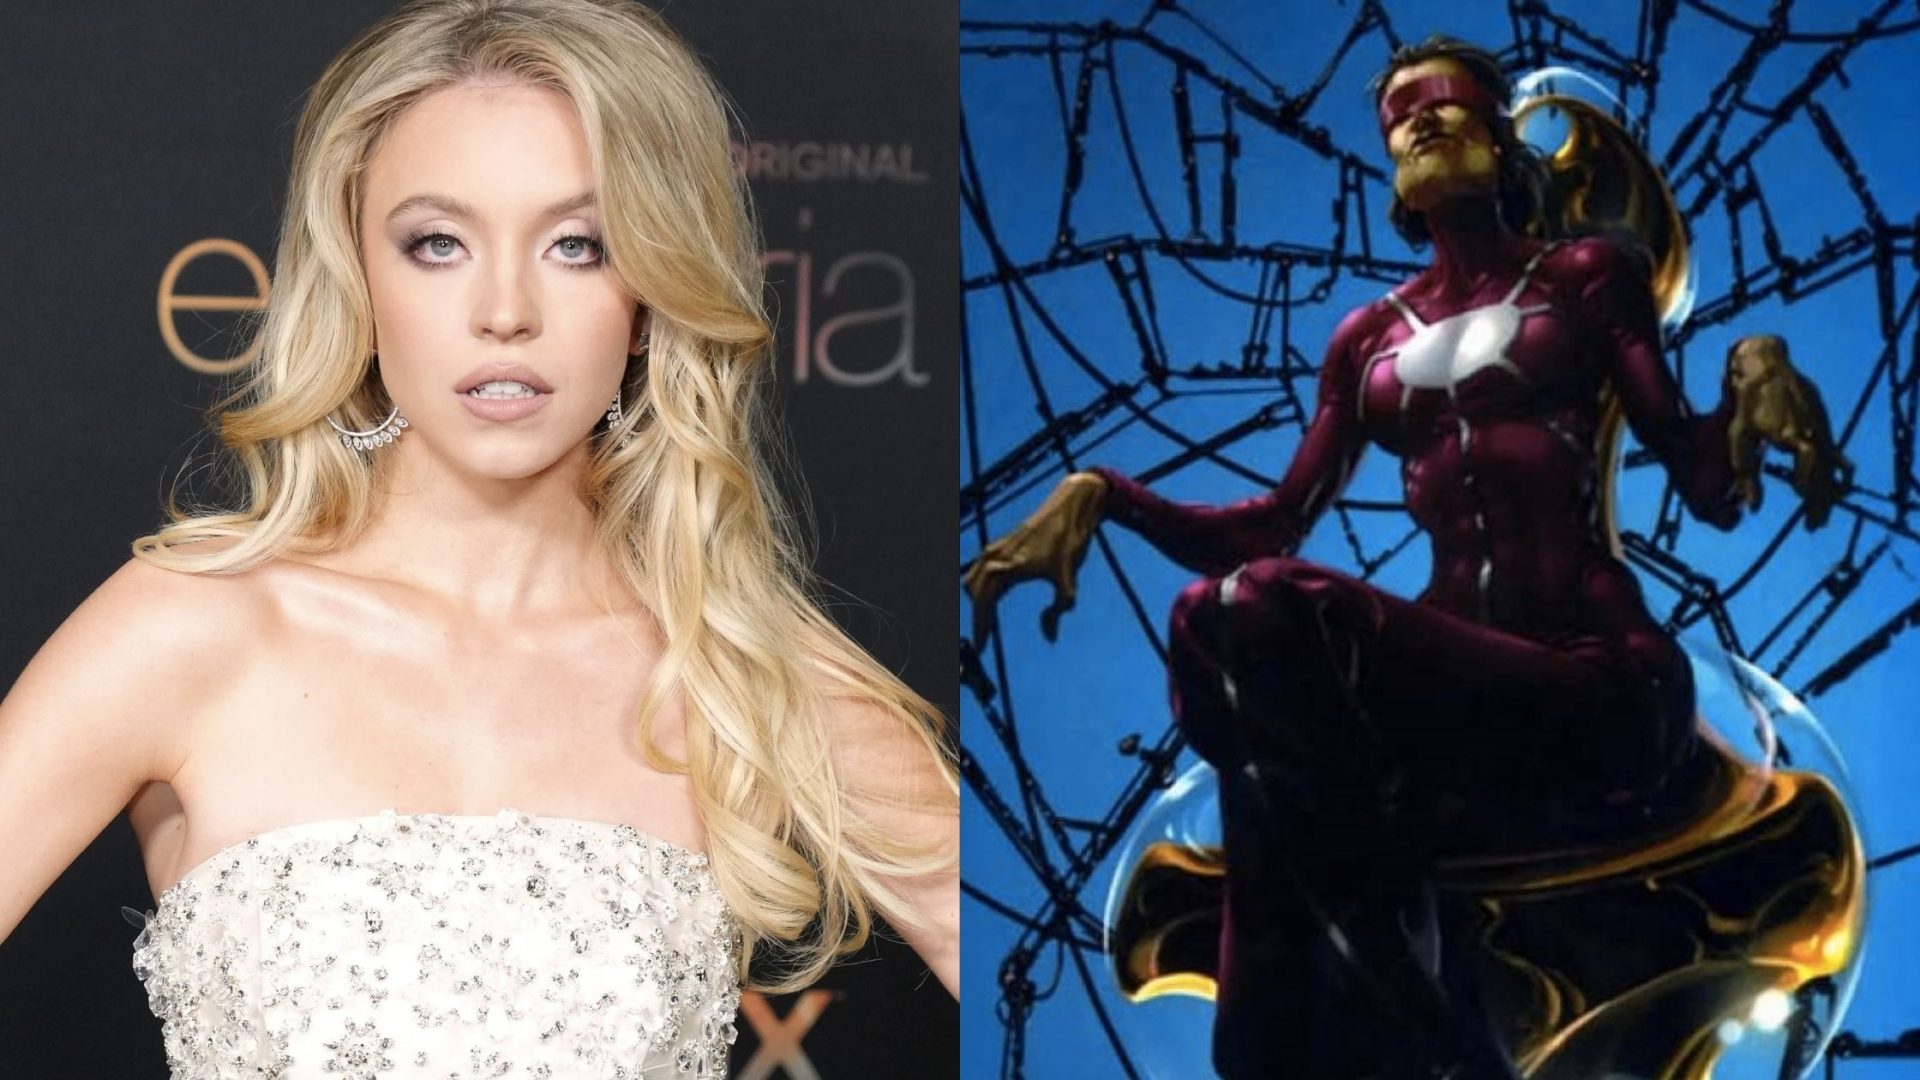 Euphoria Star 'Sydney Sweeney' joins the cast of upcoming Marvel movie 'Madame Web'